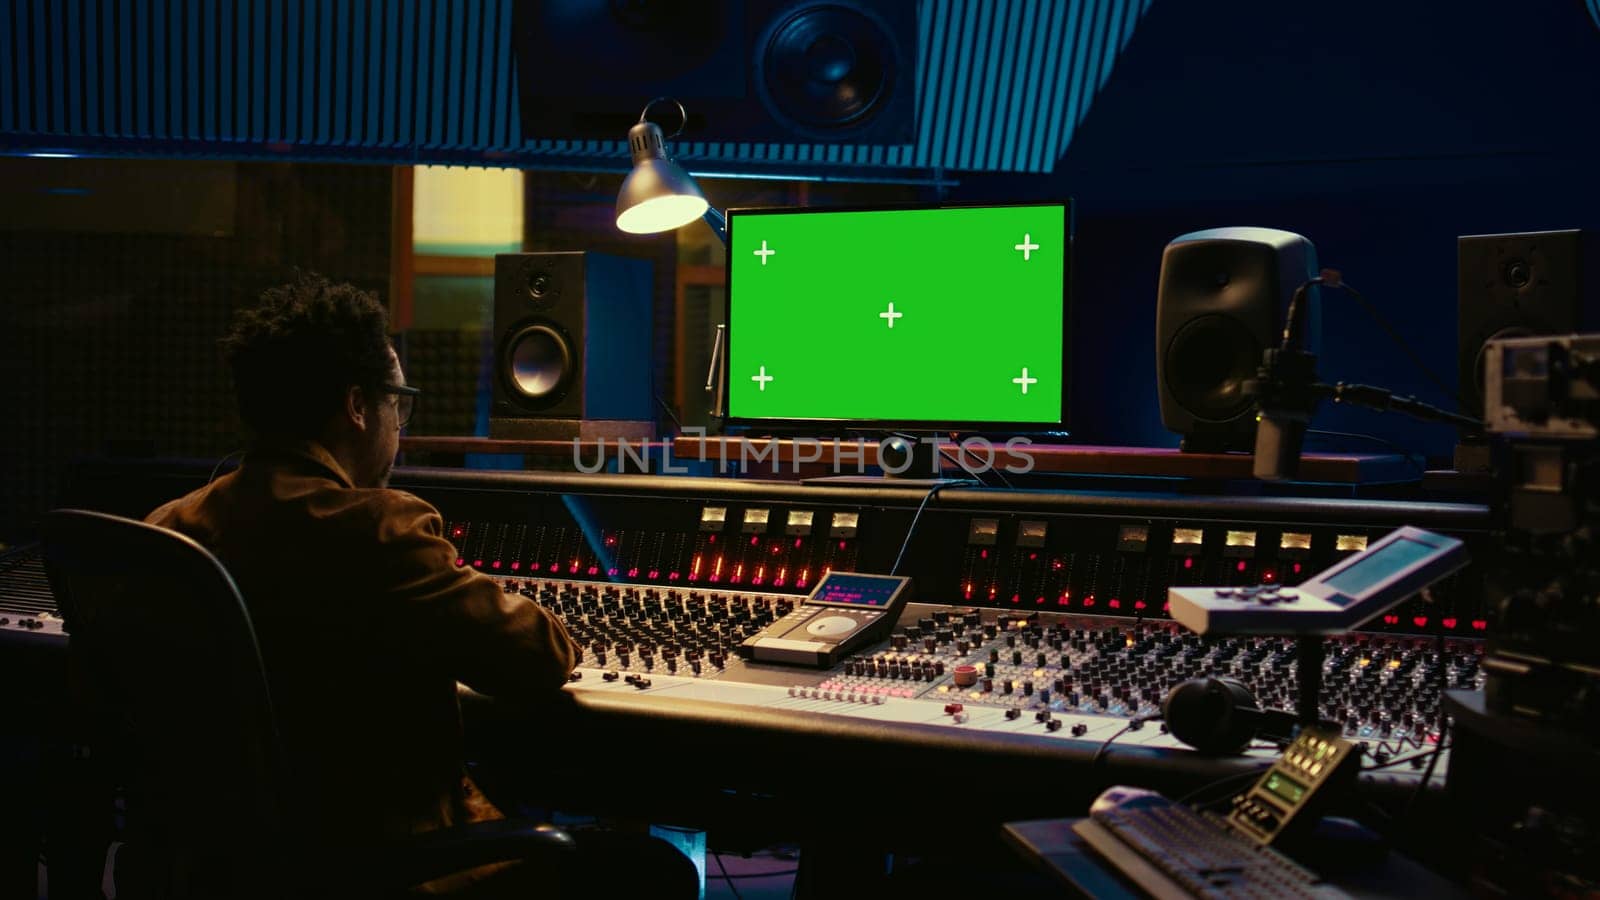 African american sound engineer working in control room with mixing console by DCStudio